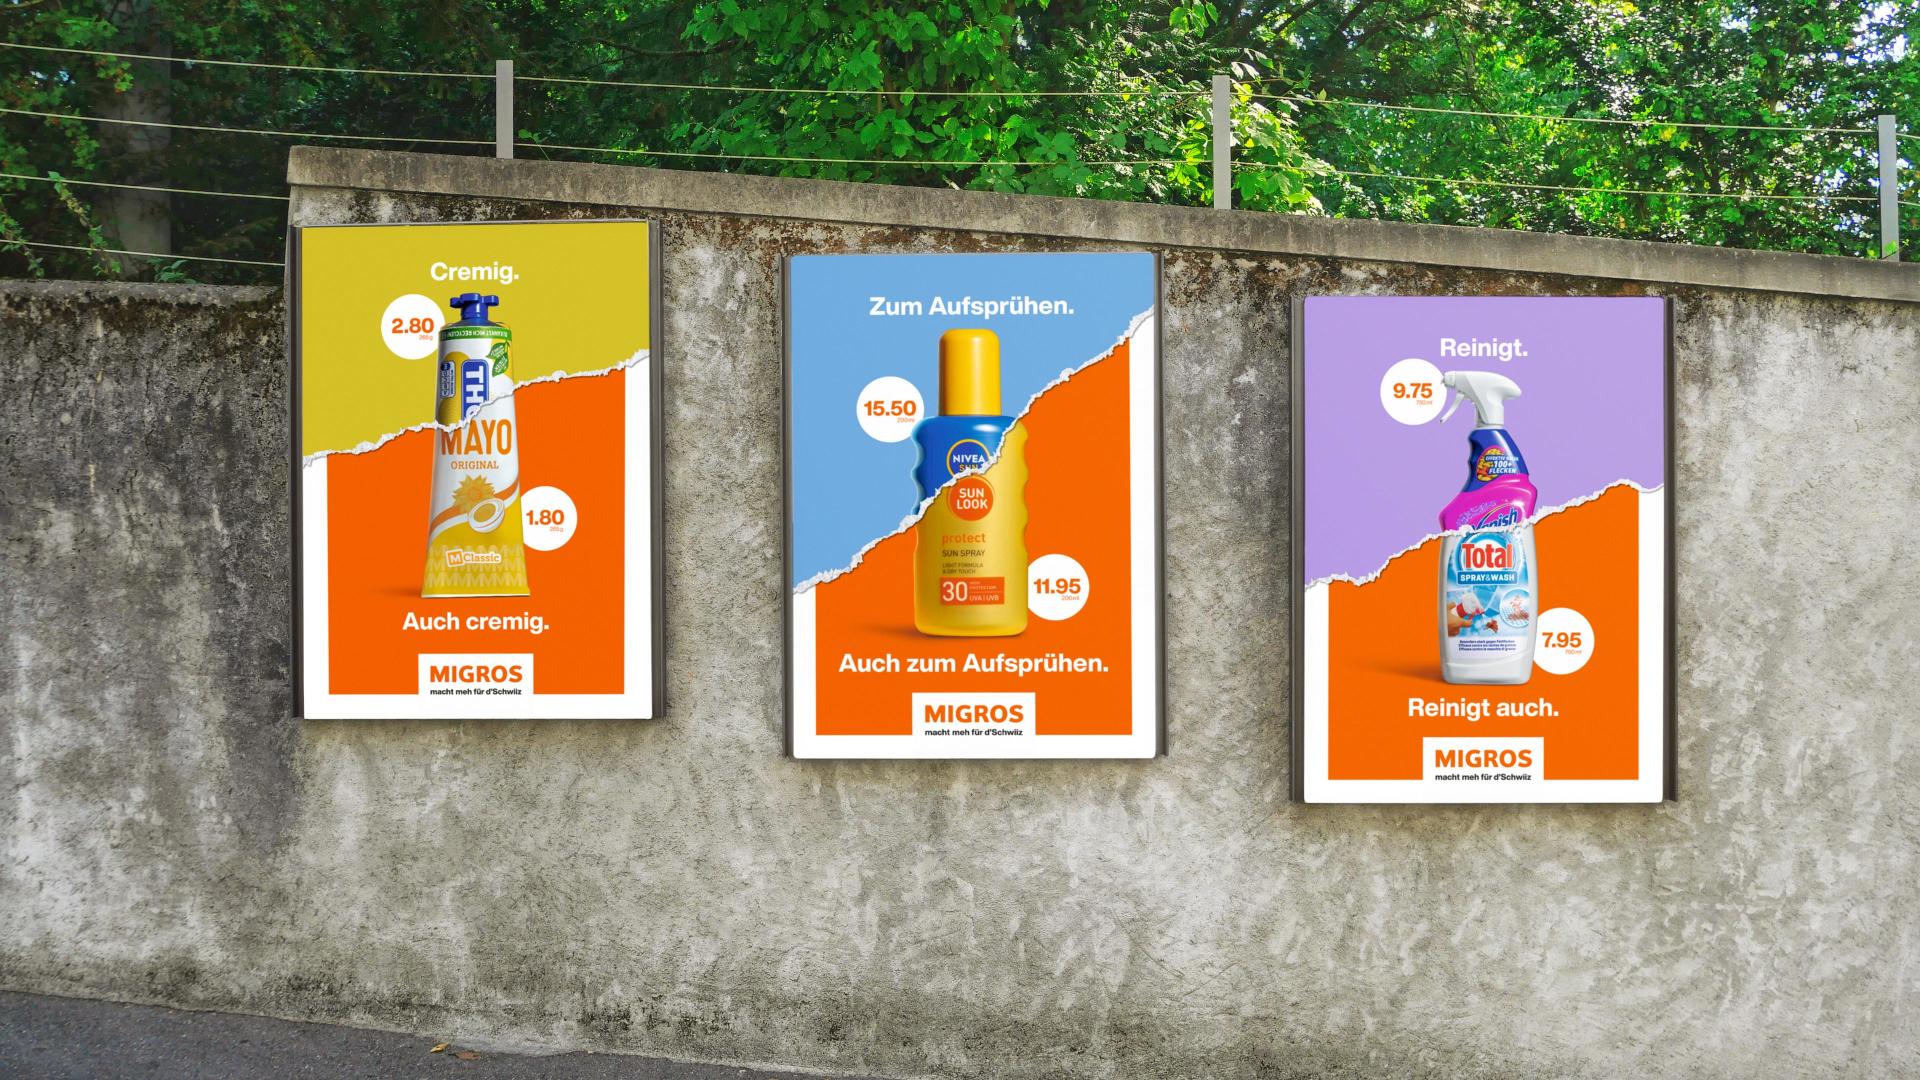 Three posters for the new Migros brand campaign